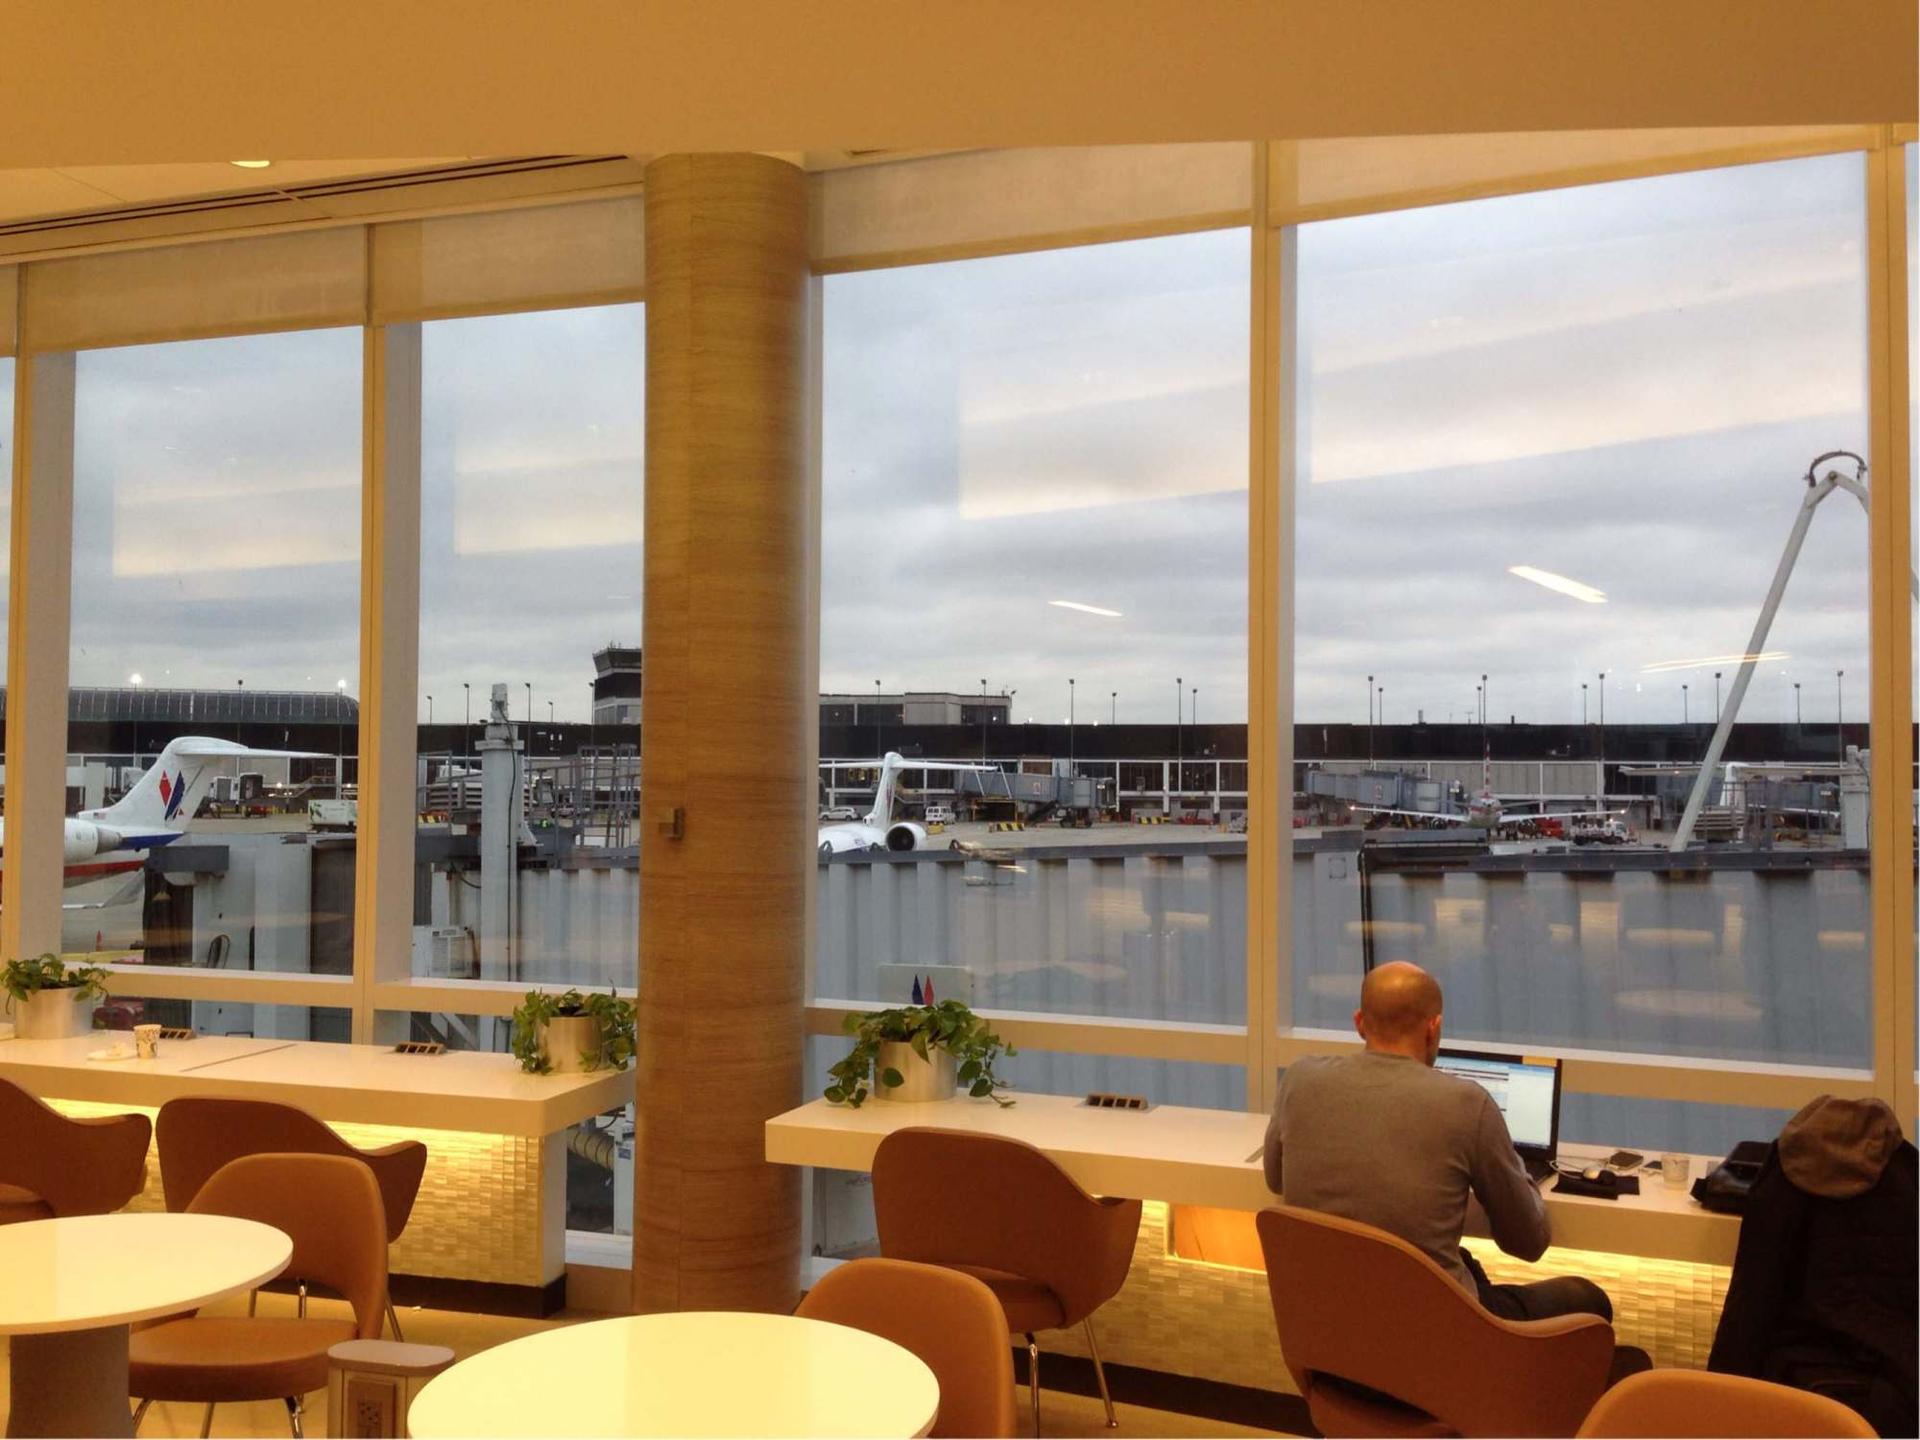 American Airlines Admirals Club image 14 of 50